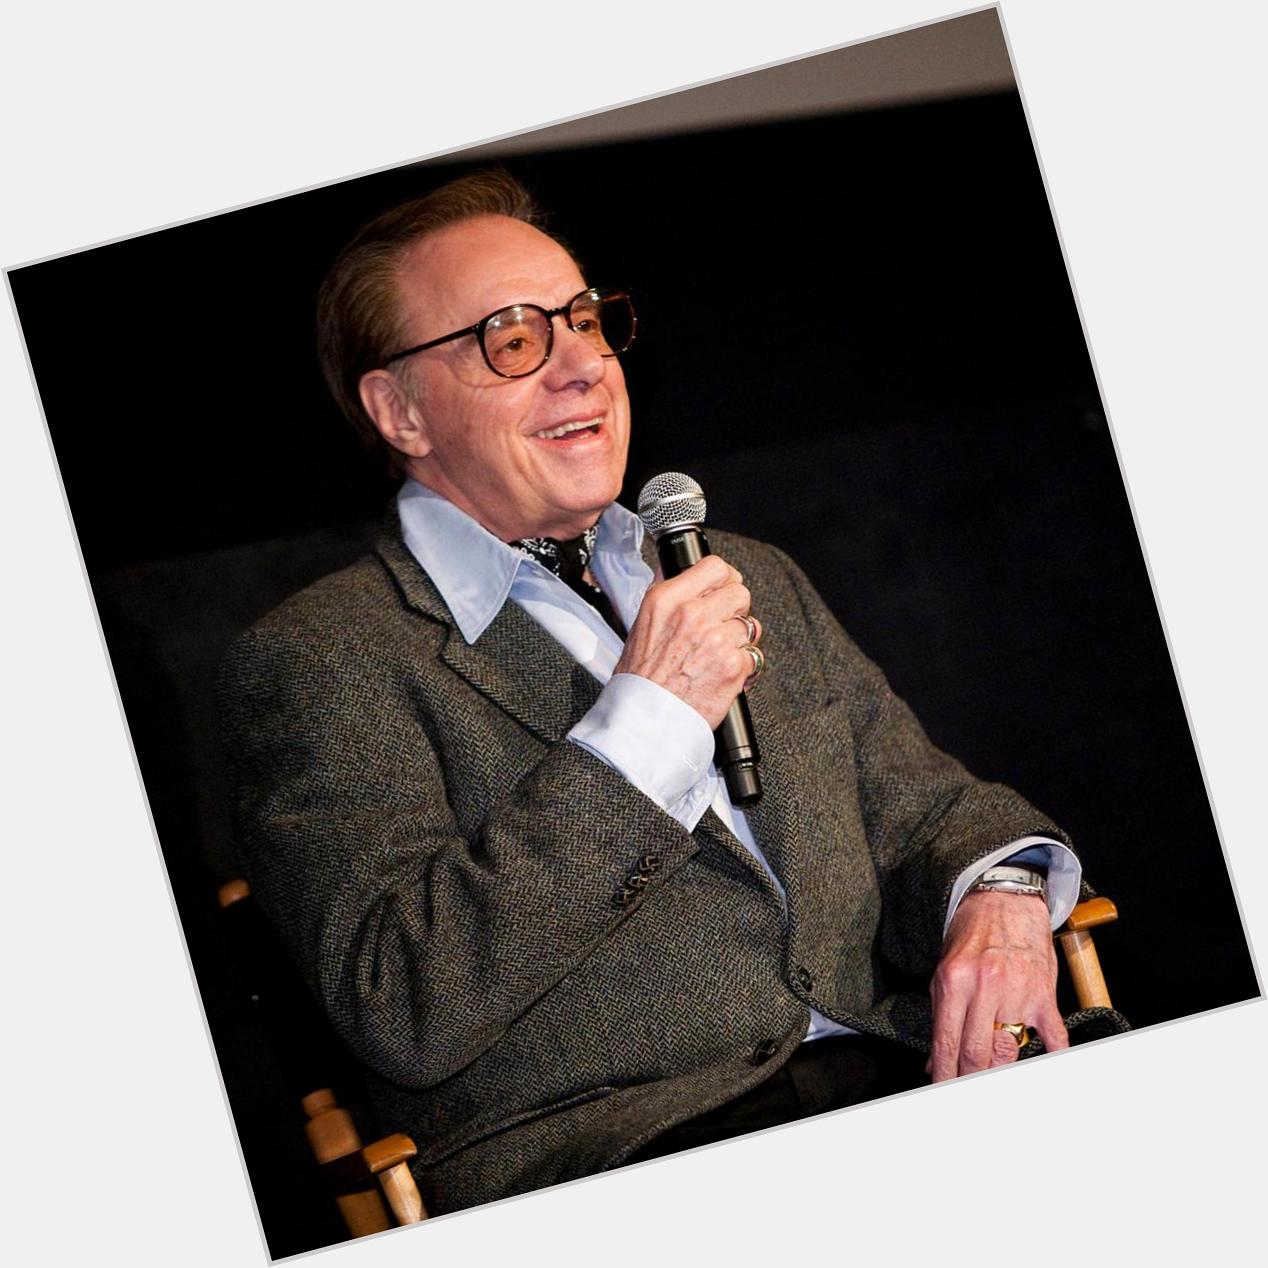 Join us in wishing friend of TCM, Peter Bogdanovich a happy birthday. 